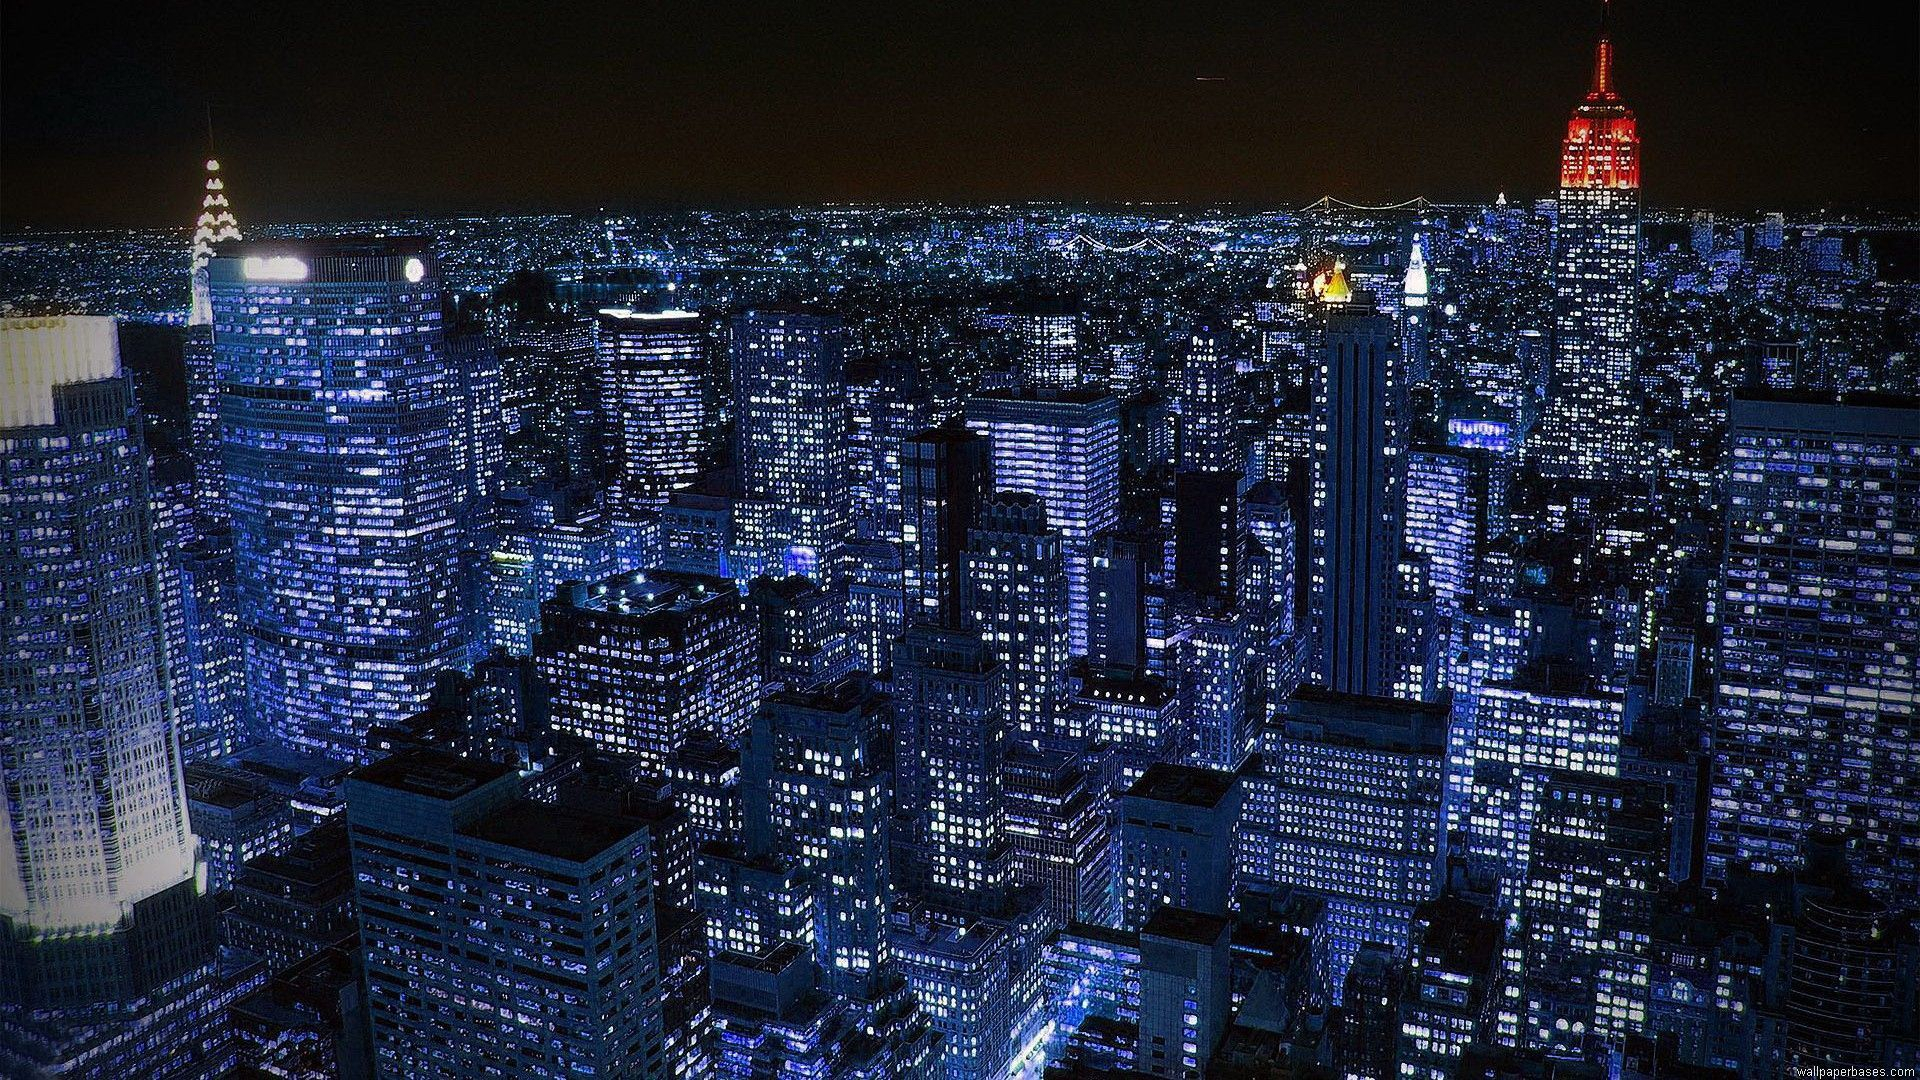 1920x1080 1920 X 1080 Night City Wallpapers Top Free 1920 X 1080 Night City Backgrounds